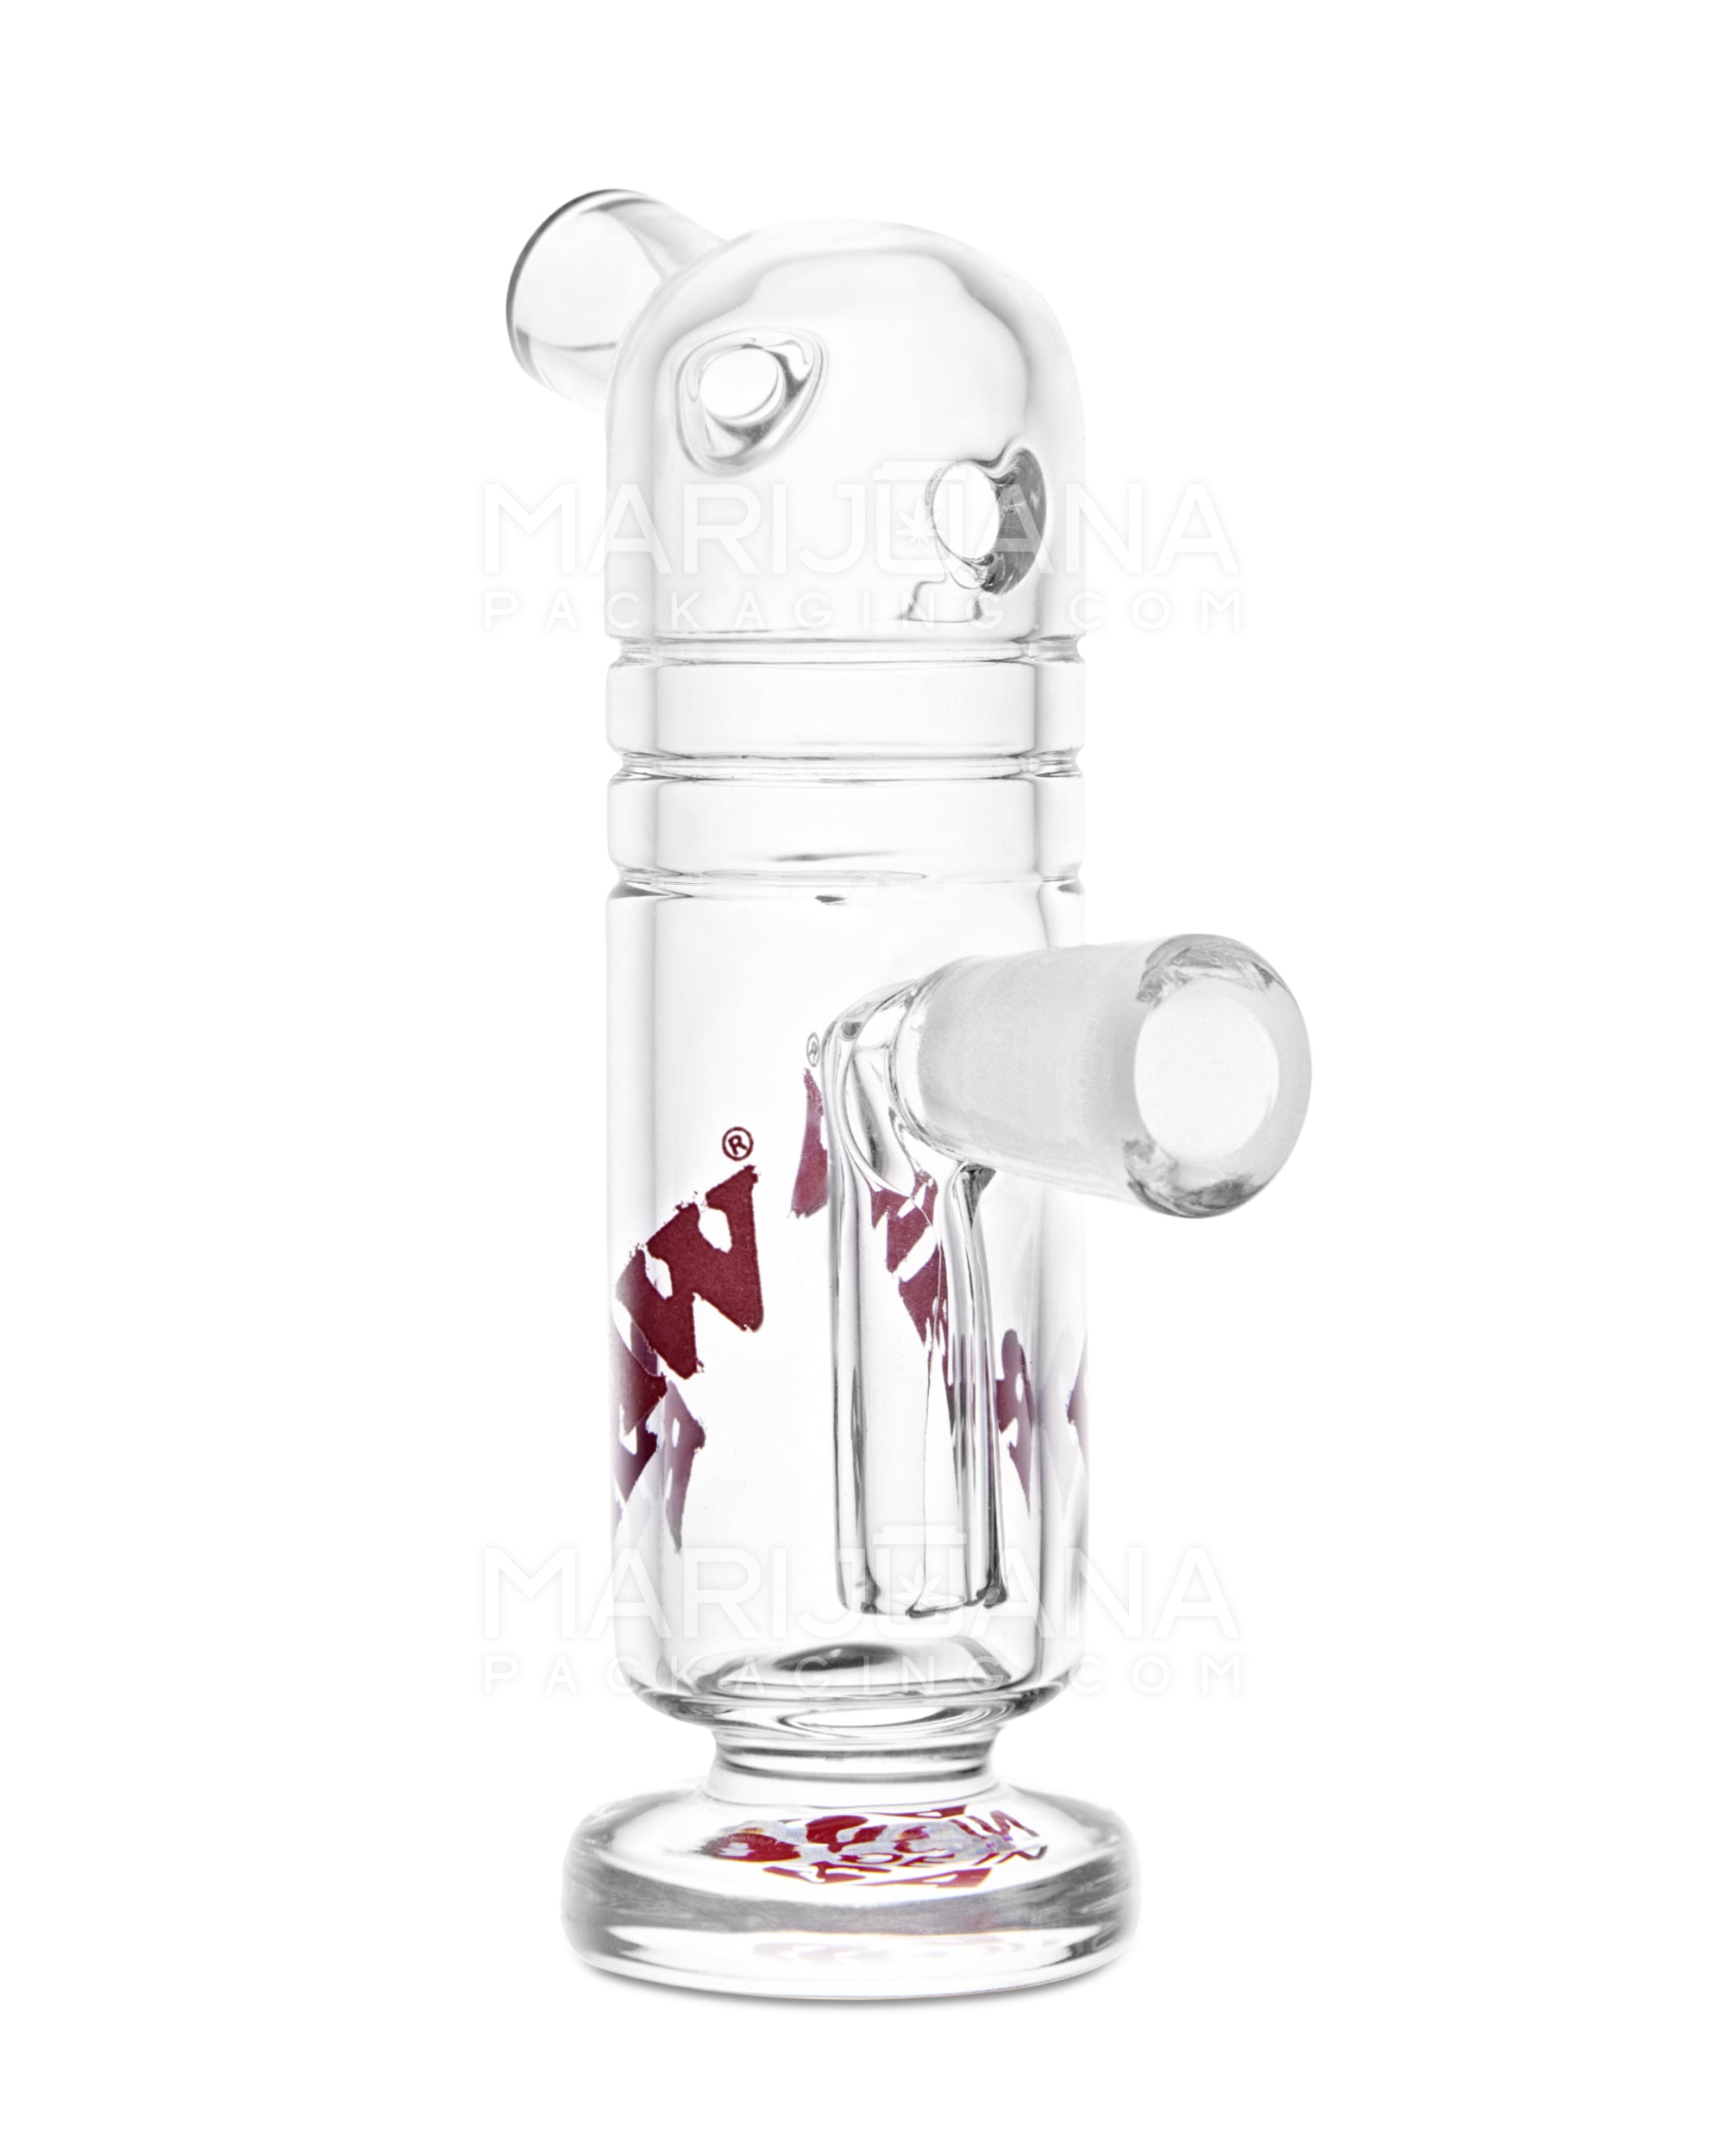 RAW | Compact Decal Glass Cone Bubbler | 2.25in Long - Glass - Clear